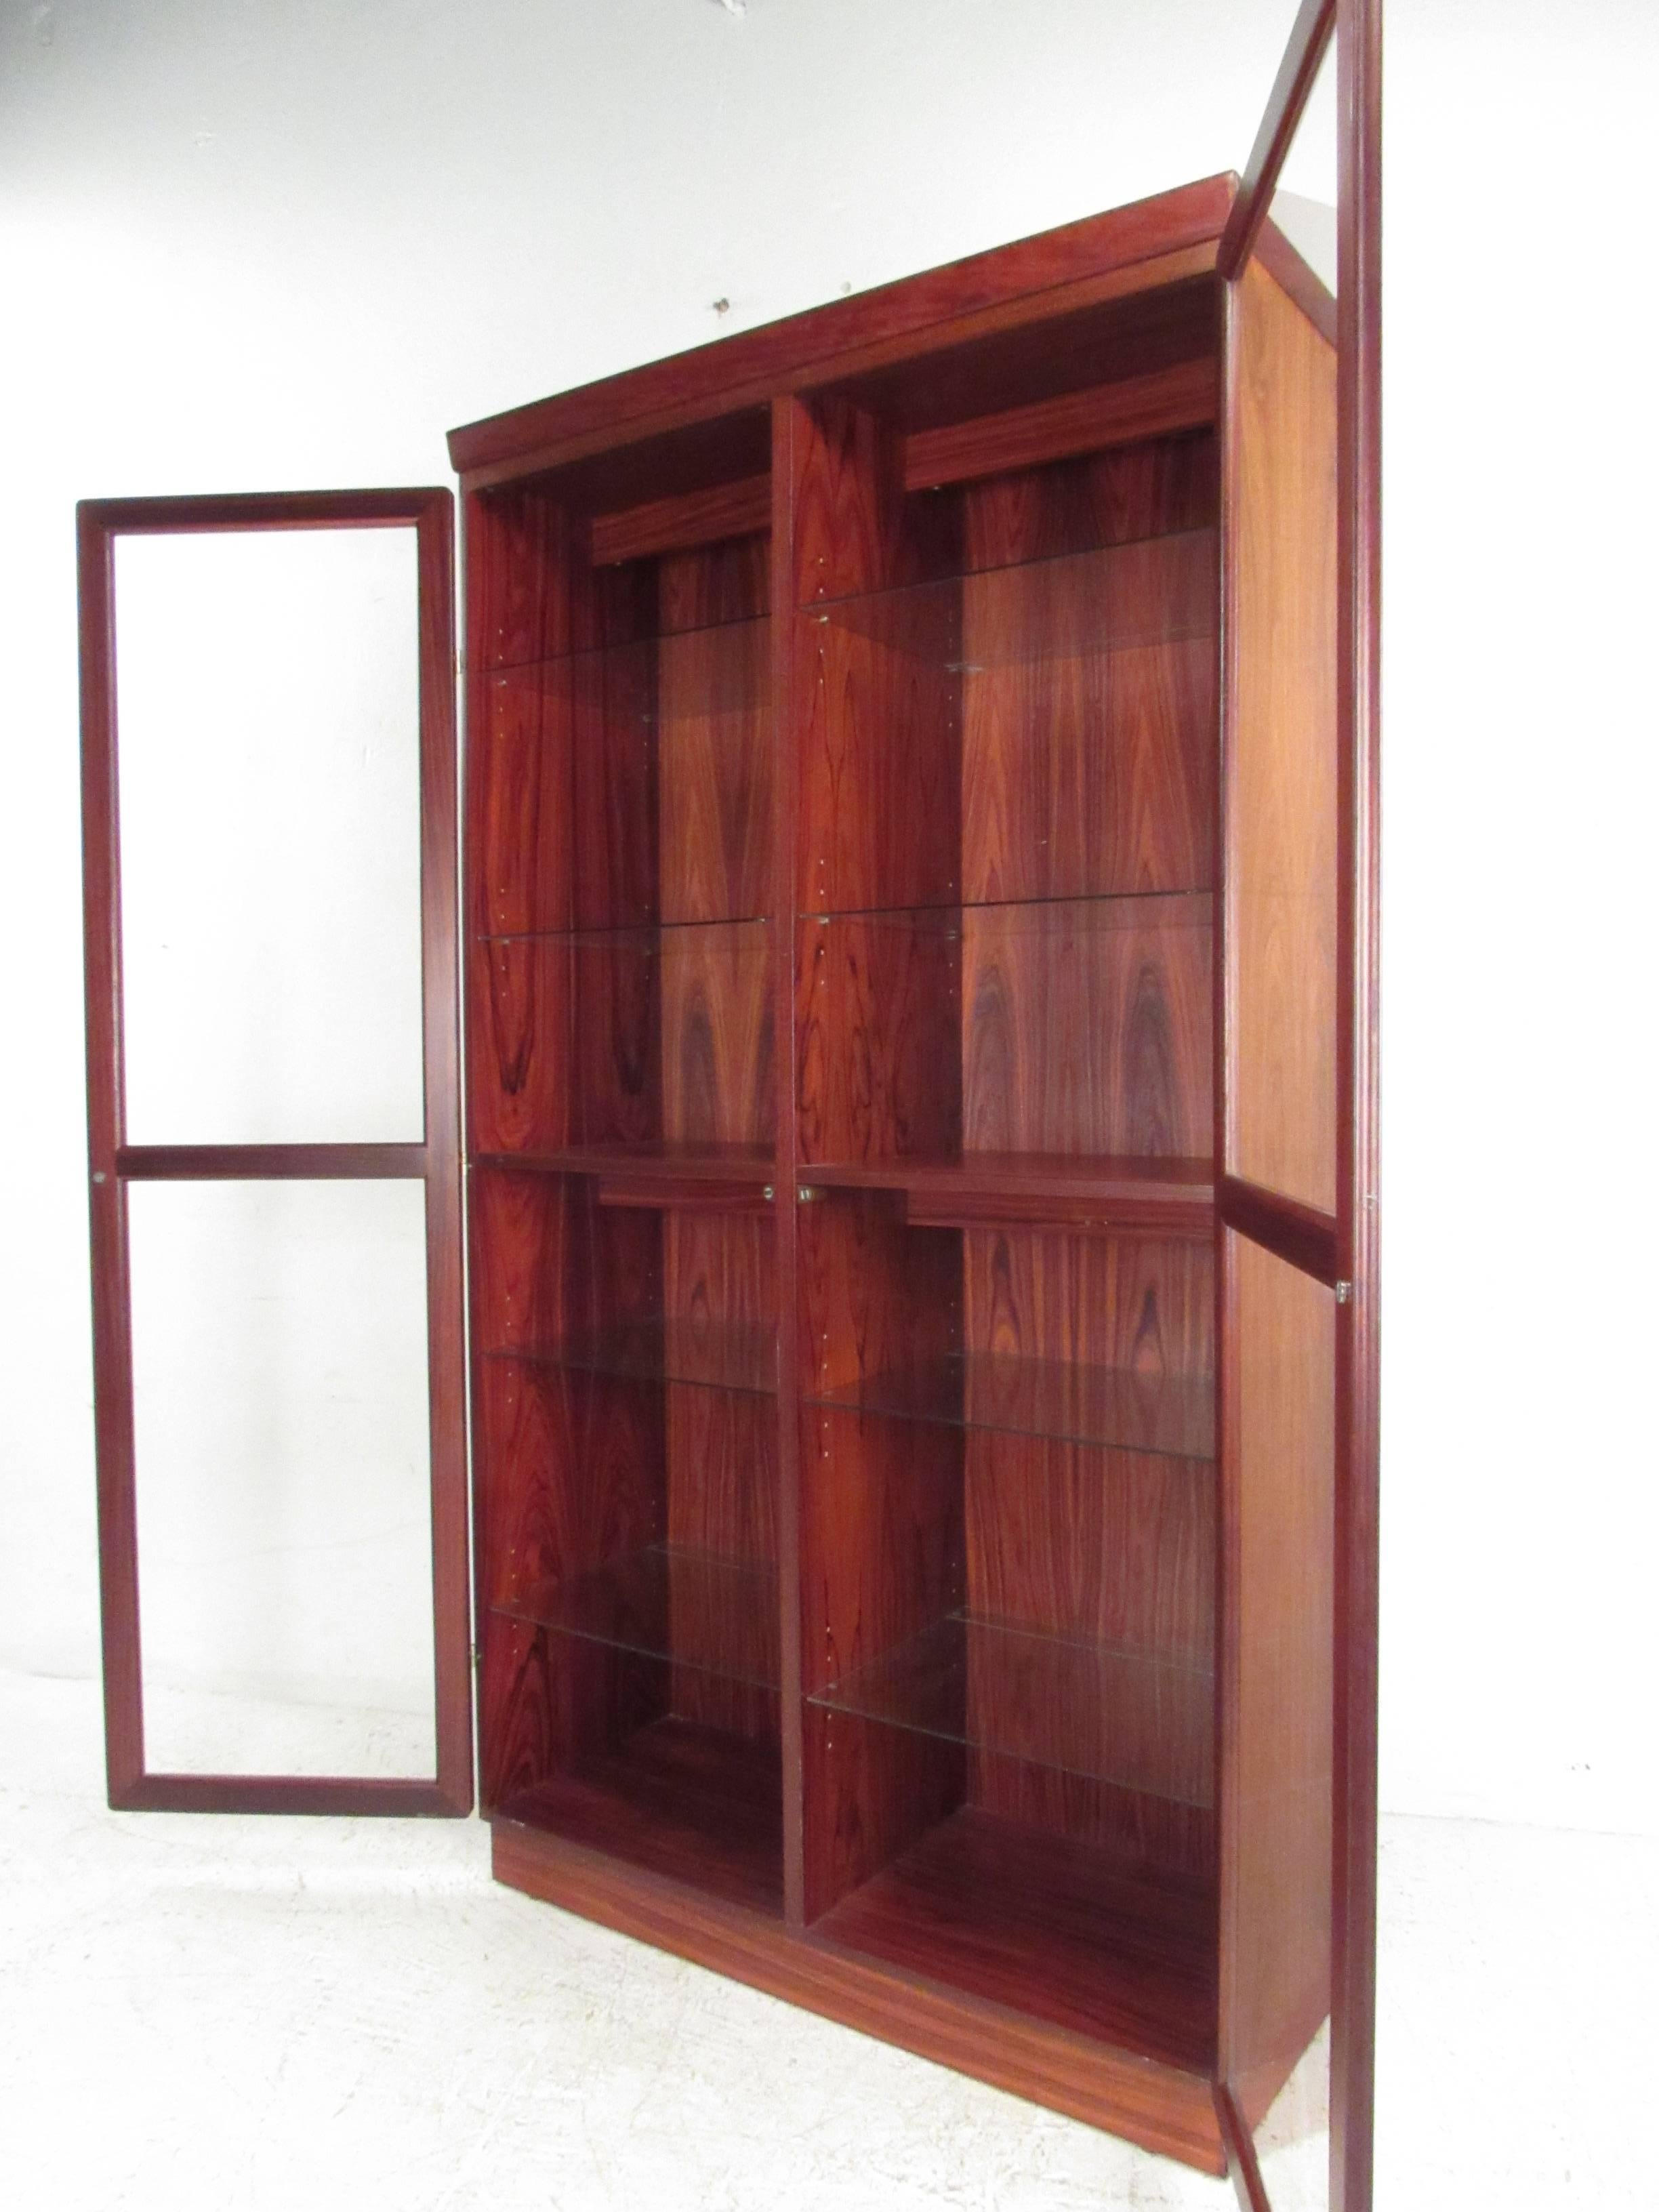 Beautifully constructed rosewood display cabinet by noted Danish manufacturer Skovby. Unit has eight adjustable glass shelves (with plate grooves), two fixed wood shelves and two interior lights. Skovby label with Danish Quality Control Makers Mark.